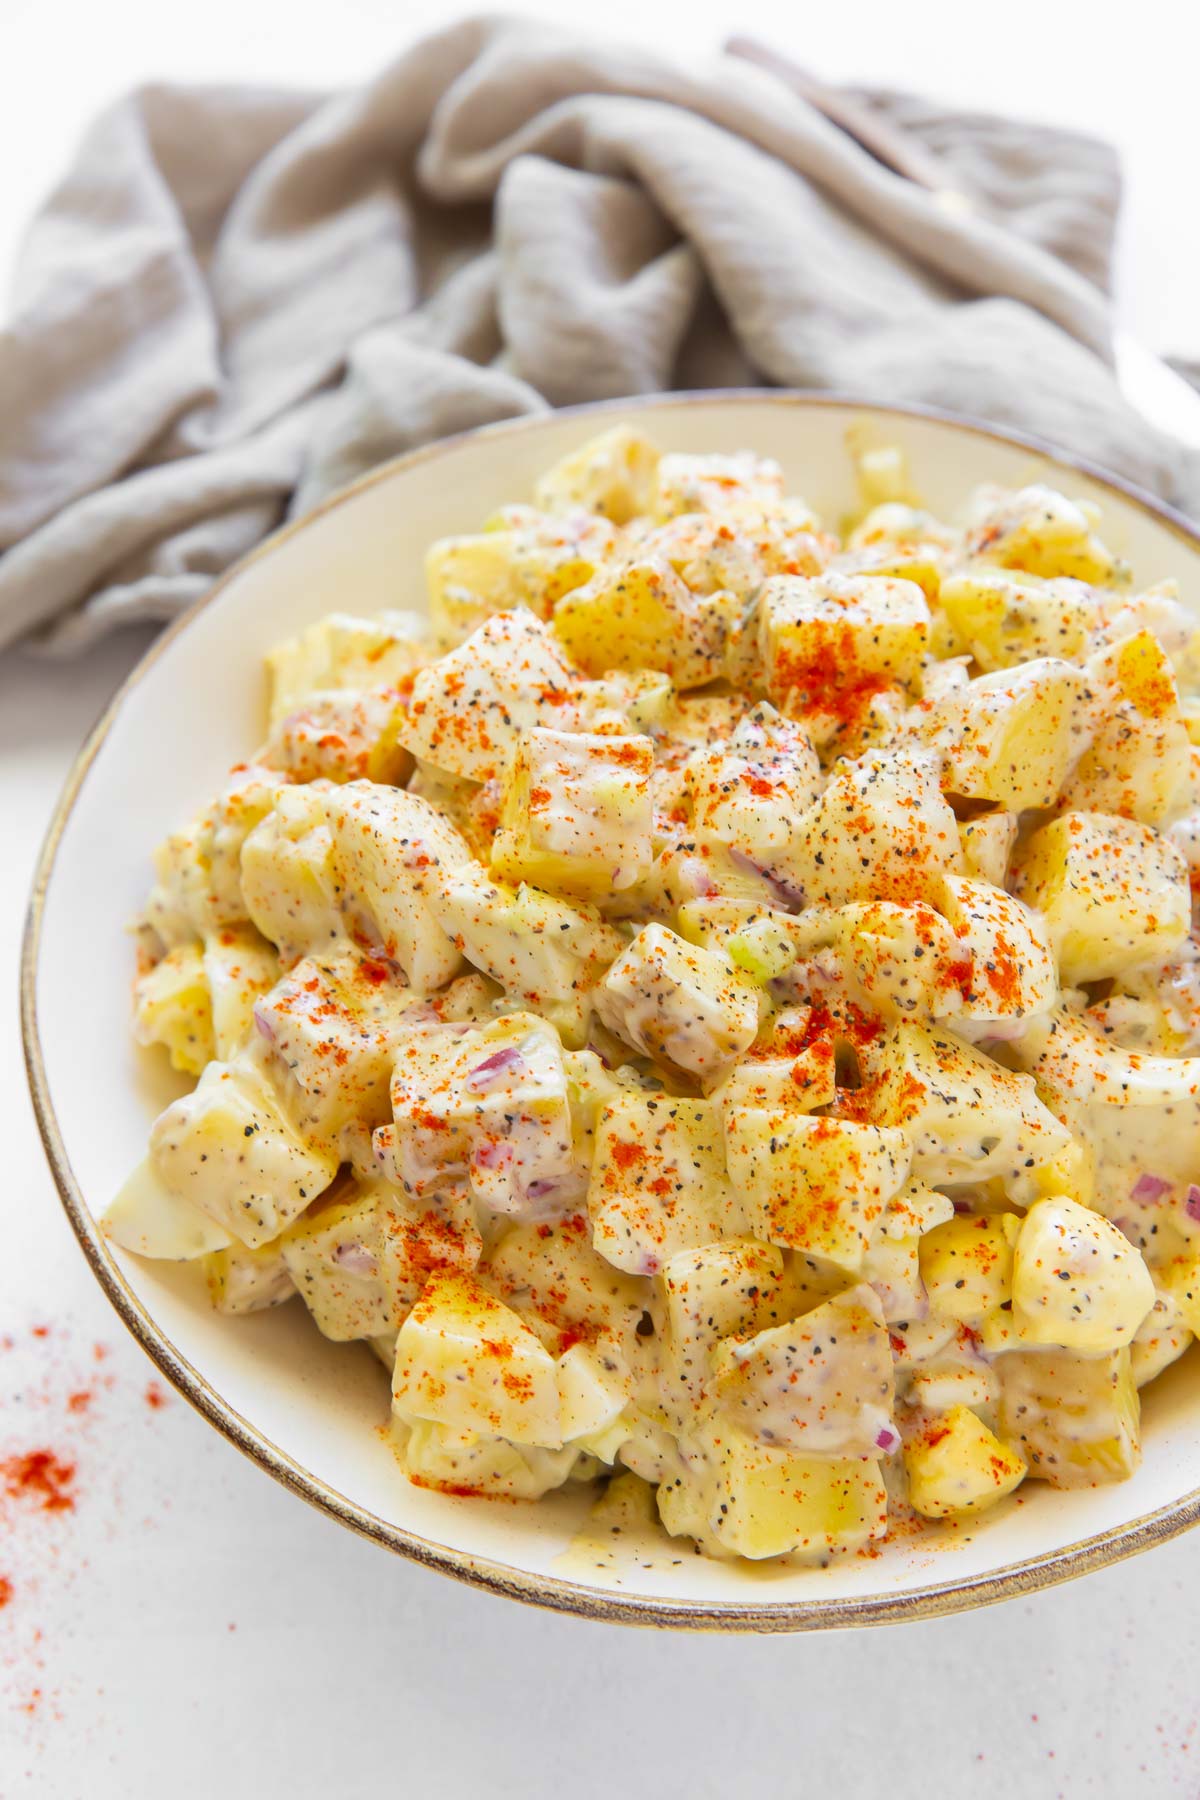 Potato salad with egg and paprika in serving bowl.